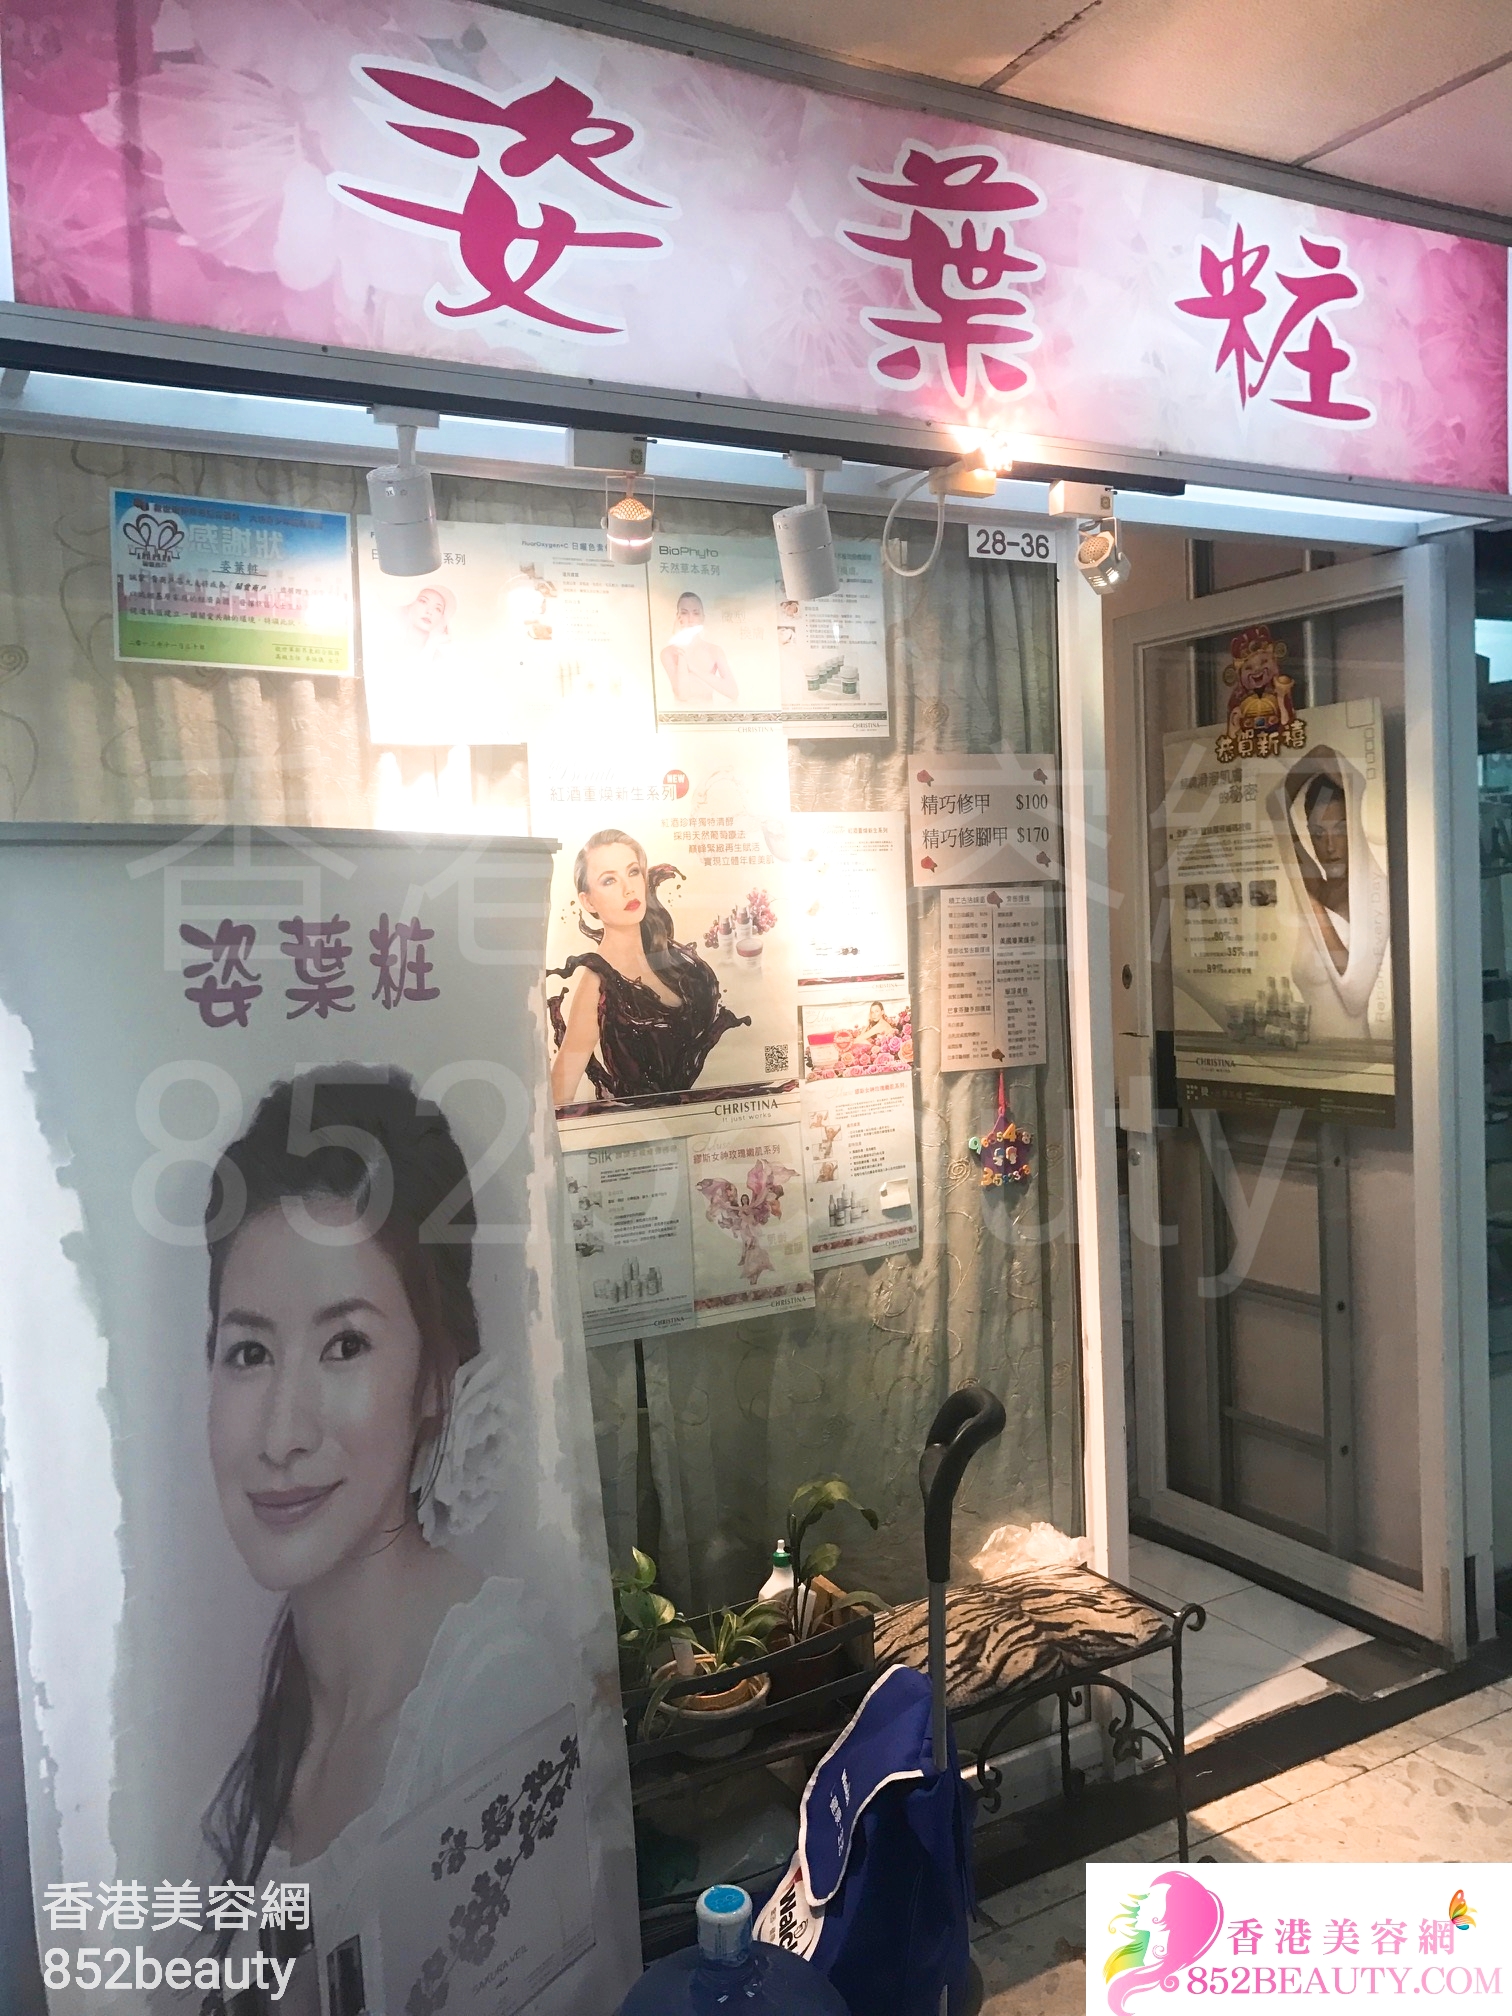 Hand and foot care: 姿葉粧